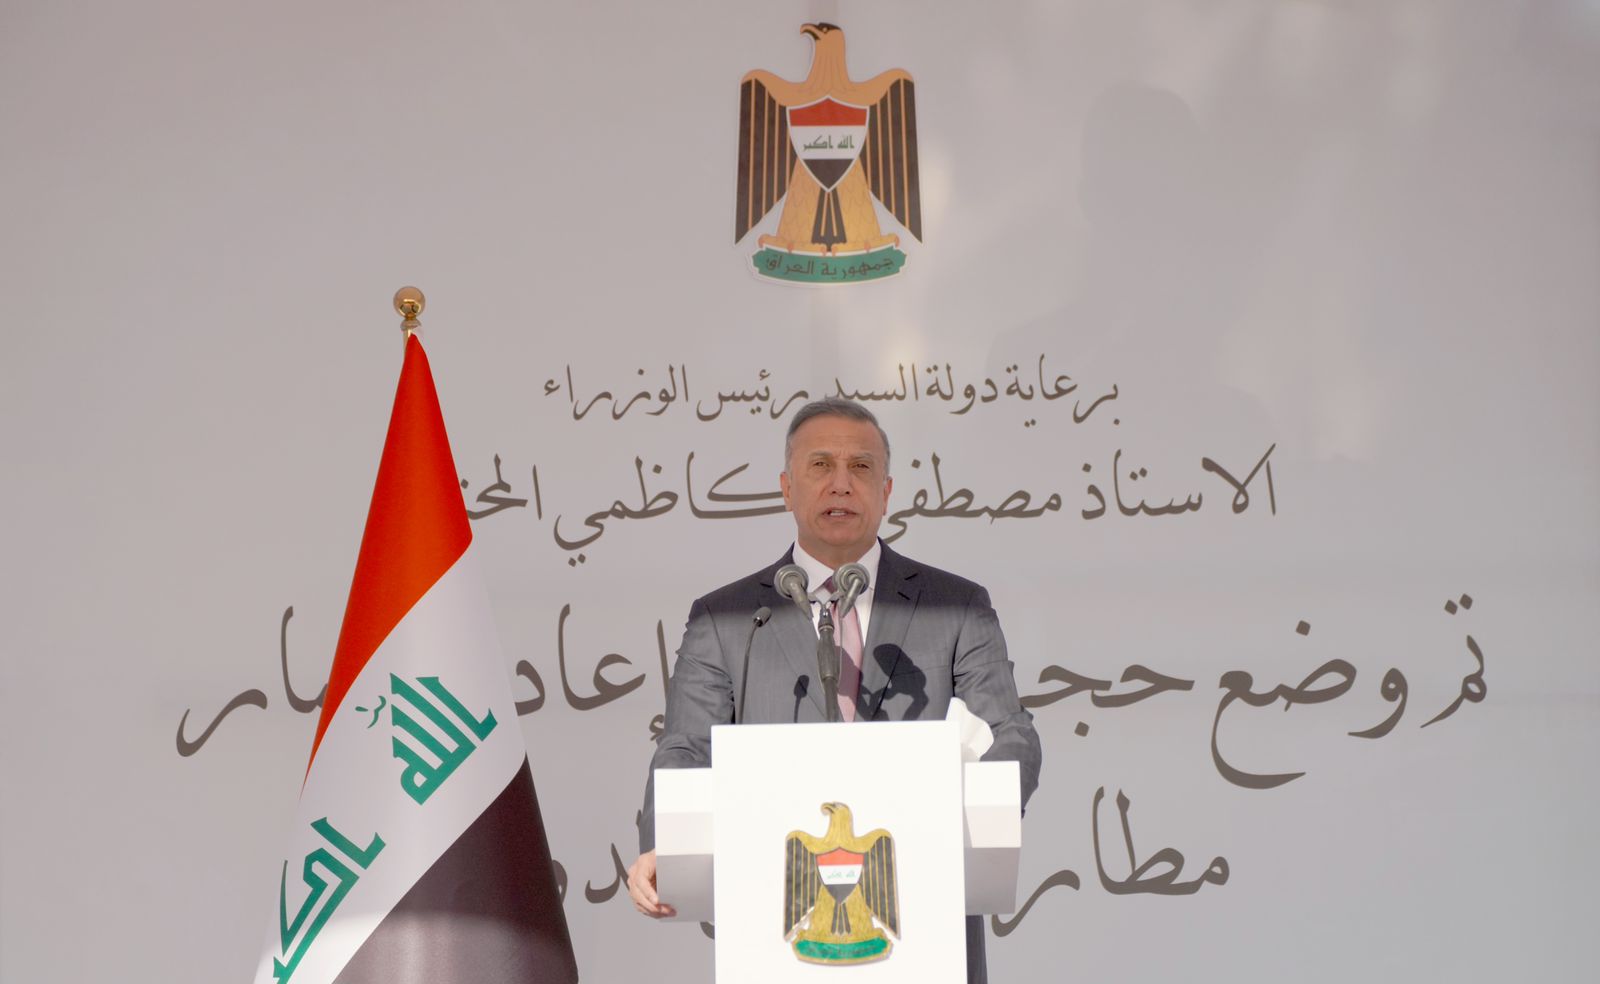 PM al-Kadhimi:dialogue is the only way out